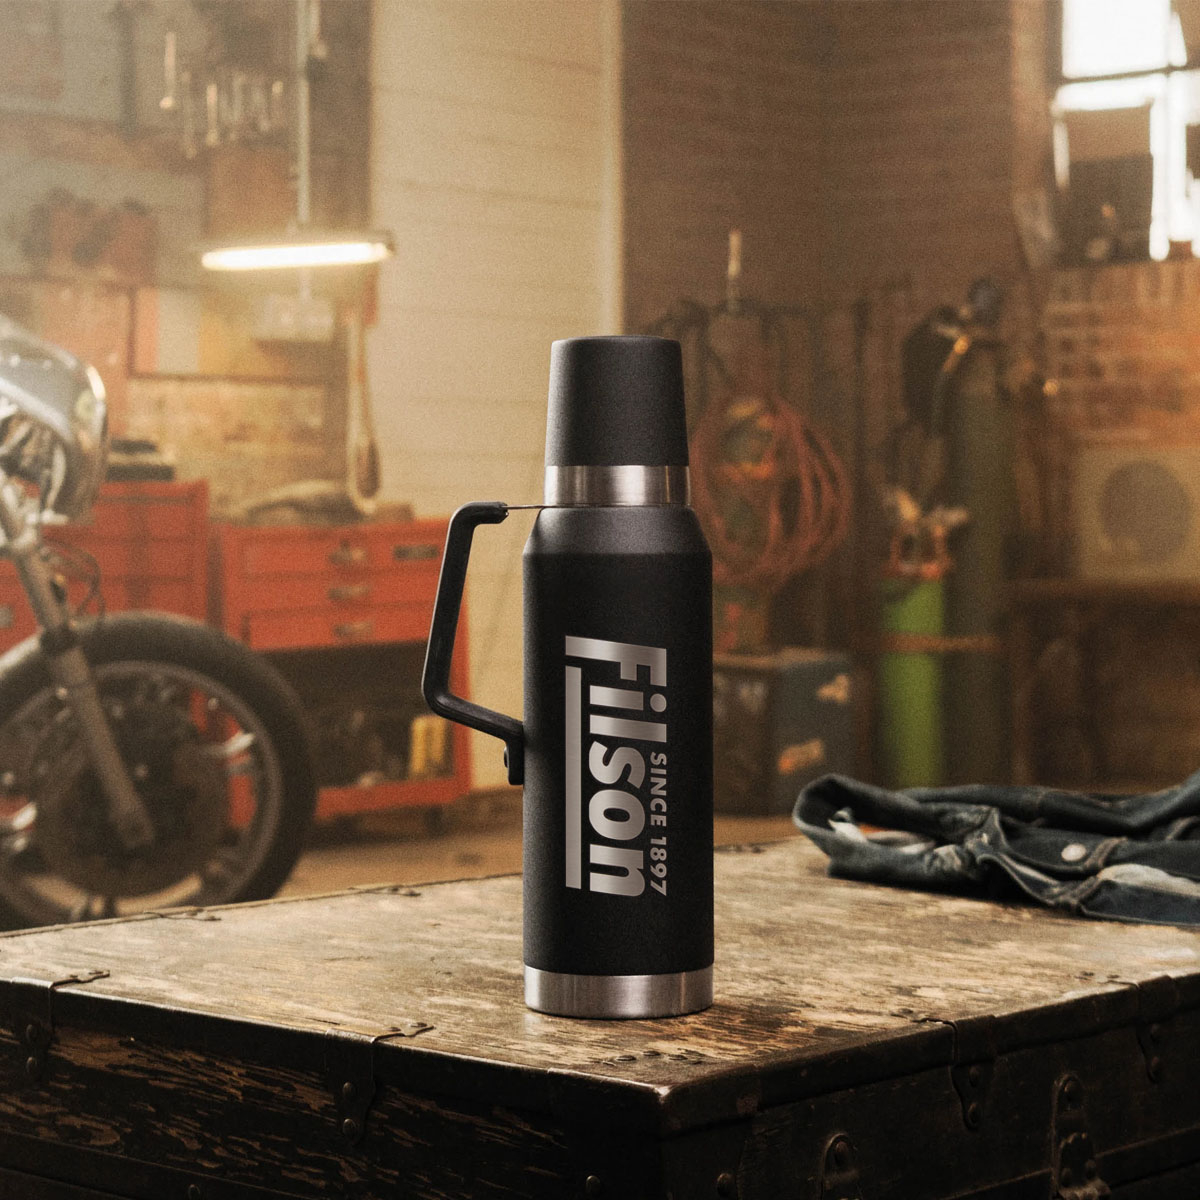 Filson Stanley Master Unbreakable Thermal Bottle 1.4 QT | 1.3L, Bigger. Better. Unbreakable. And ready for anything